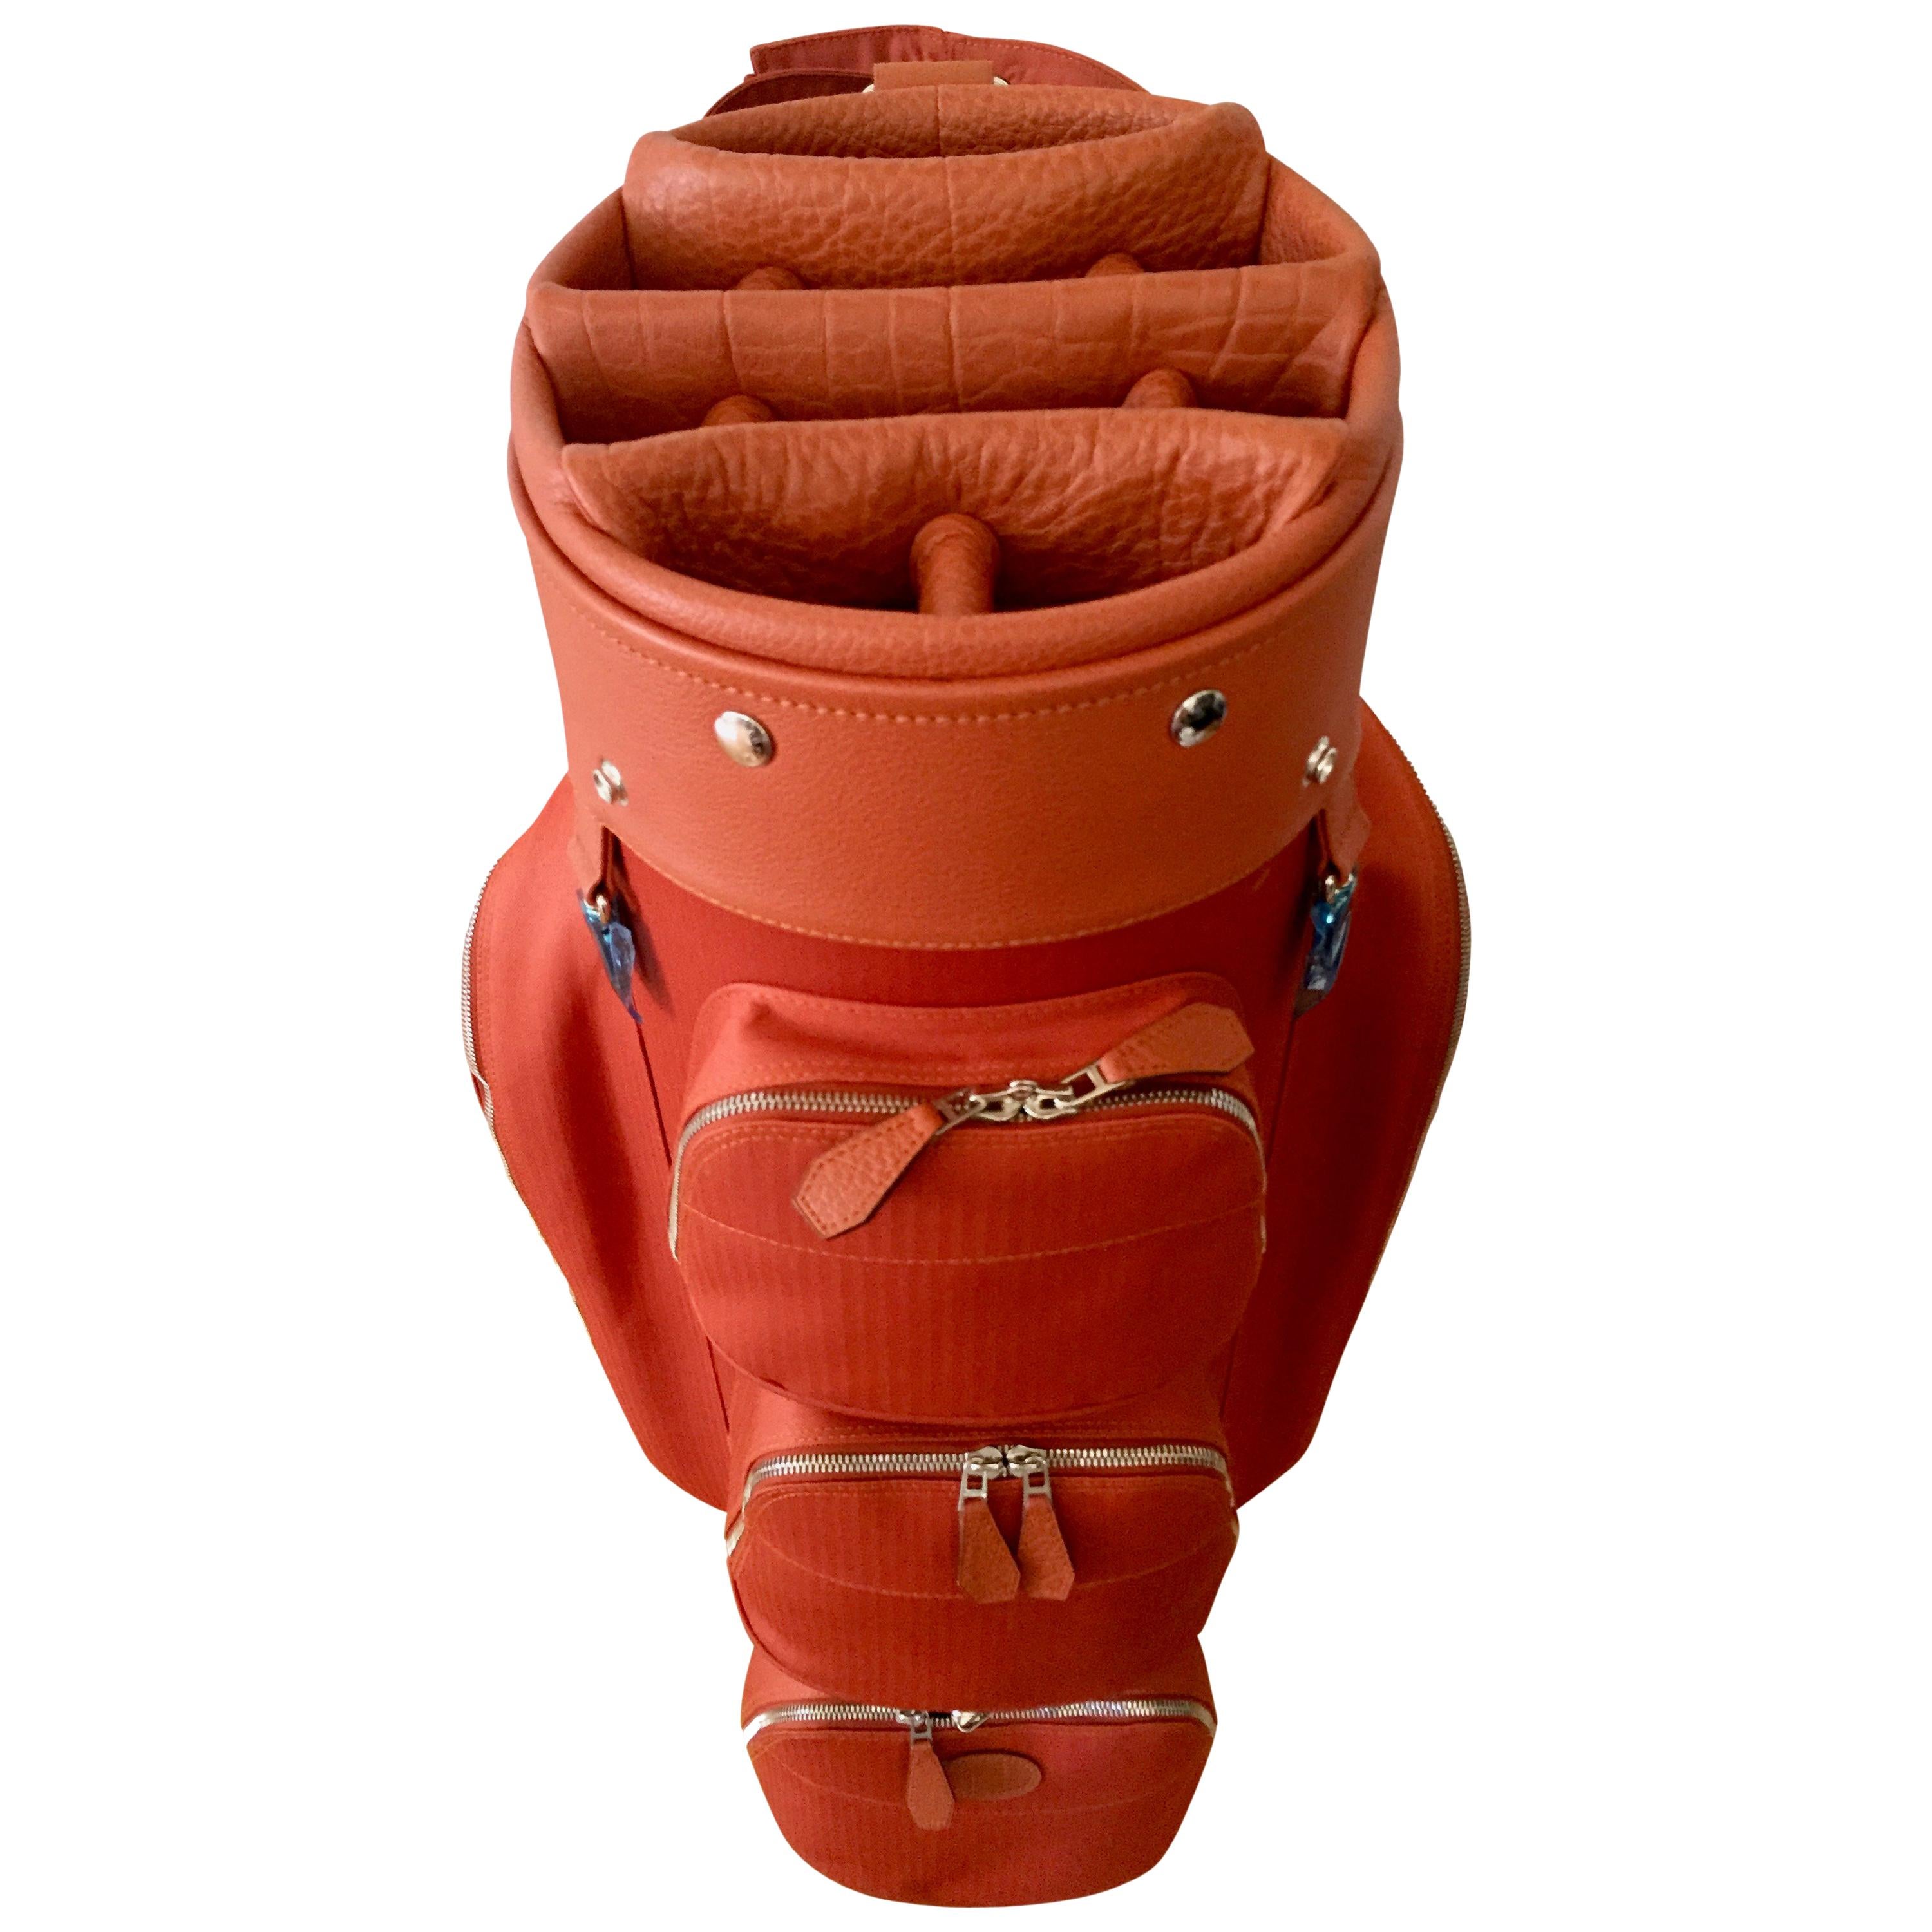 Hermes Golf Bag Limited Edition Tangerine Color Buffalo Leather, Made in France For Sale